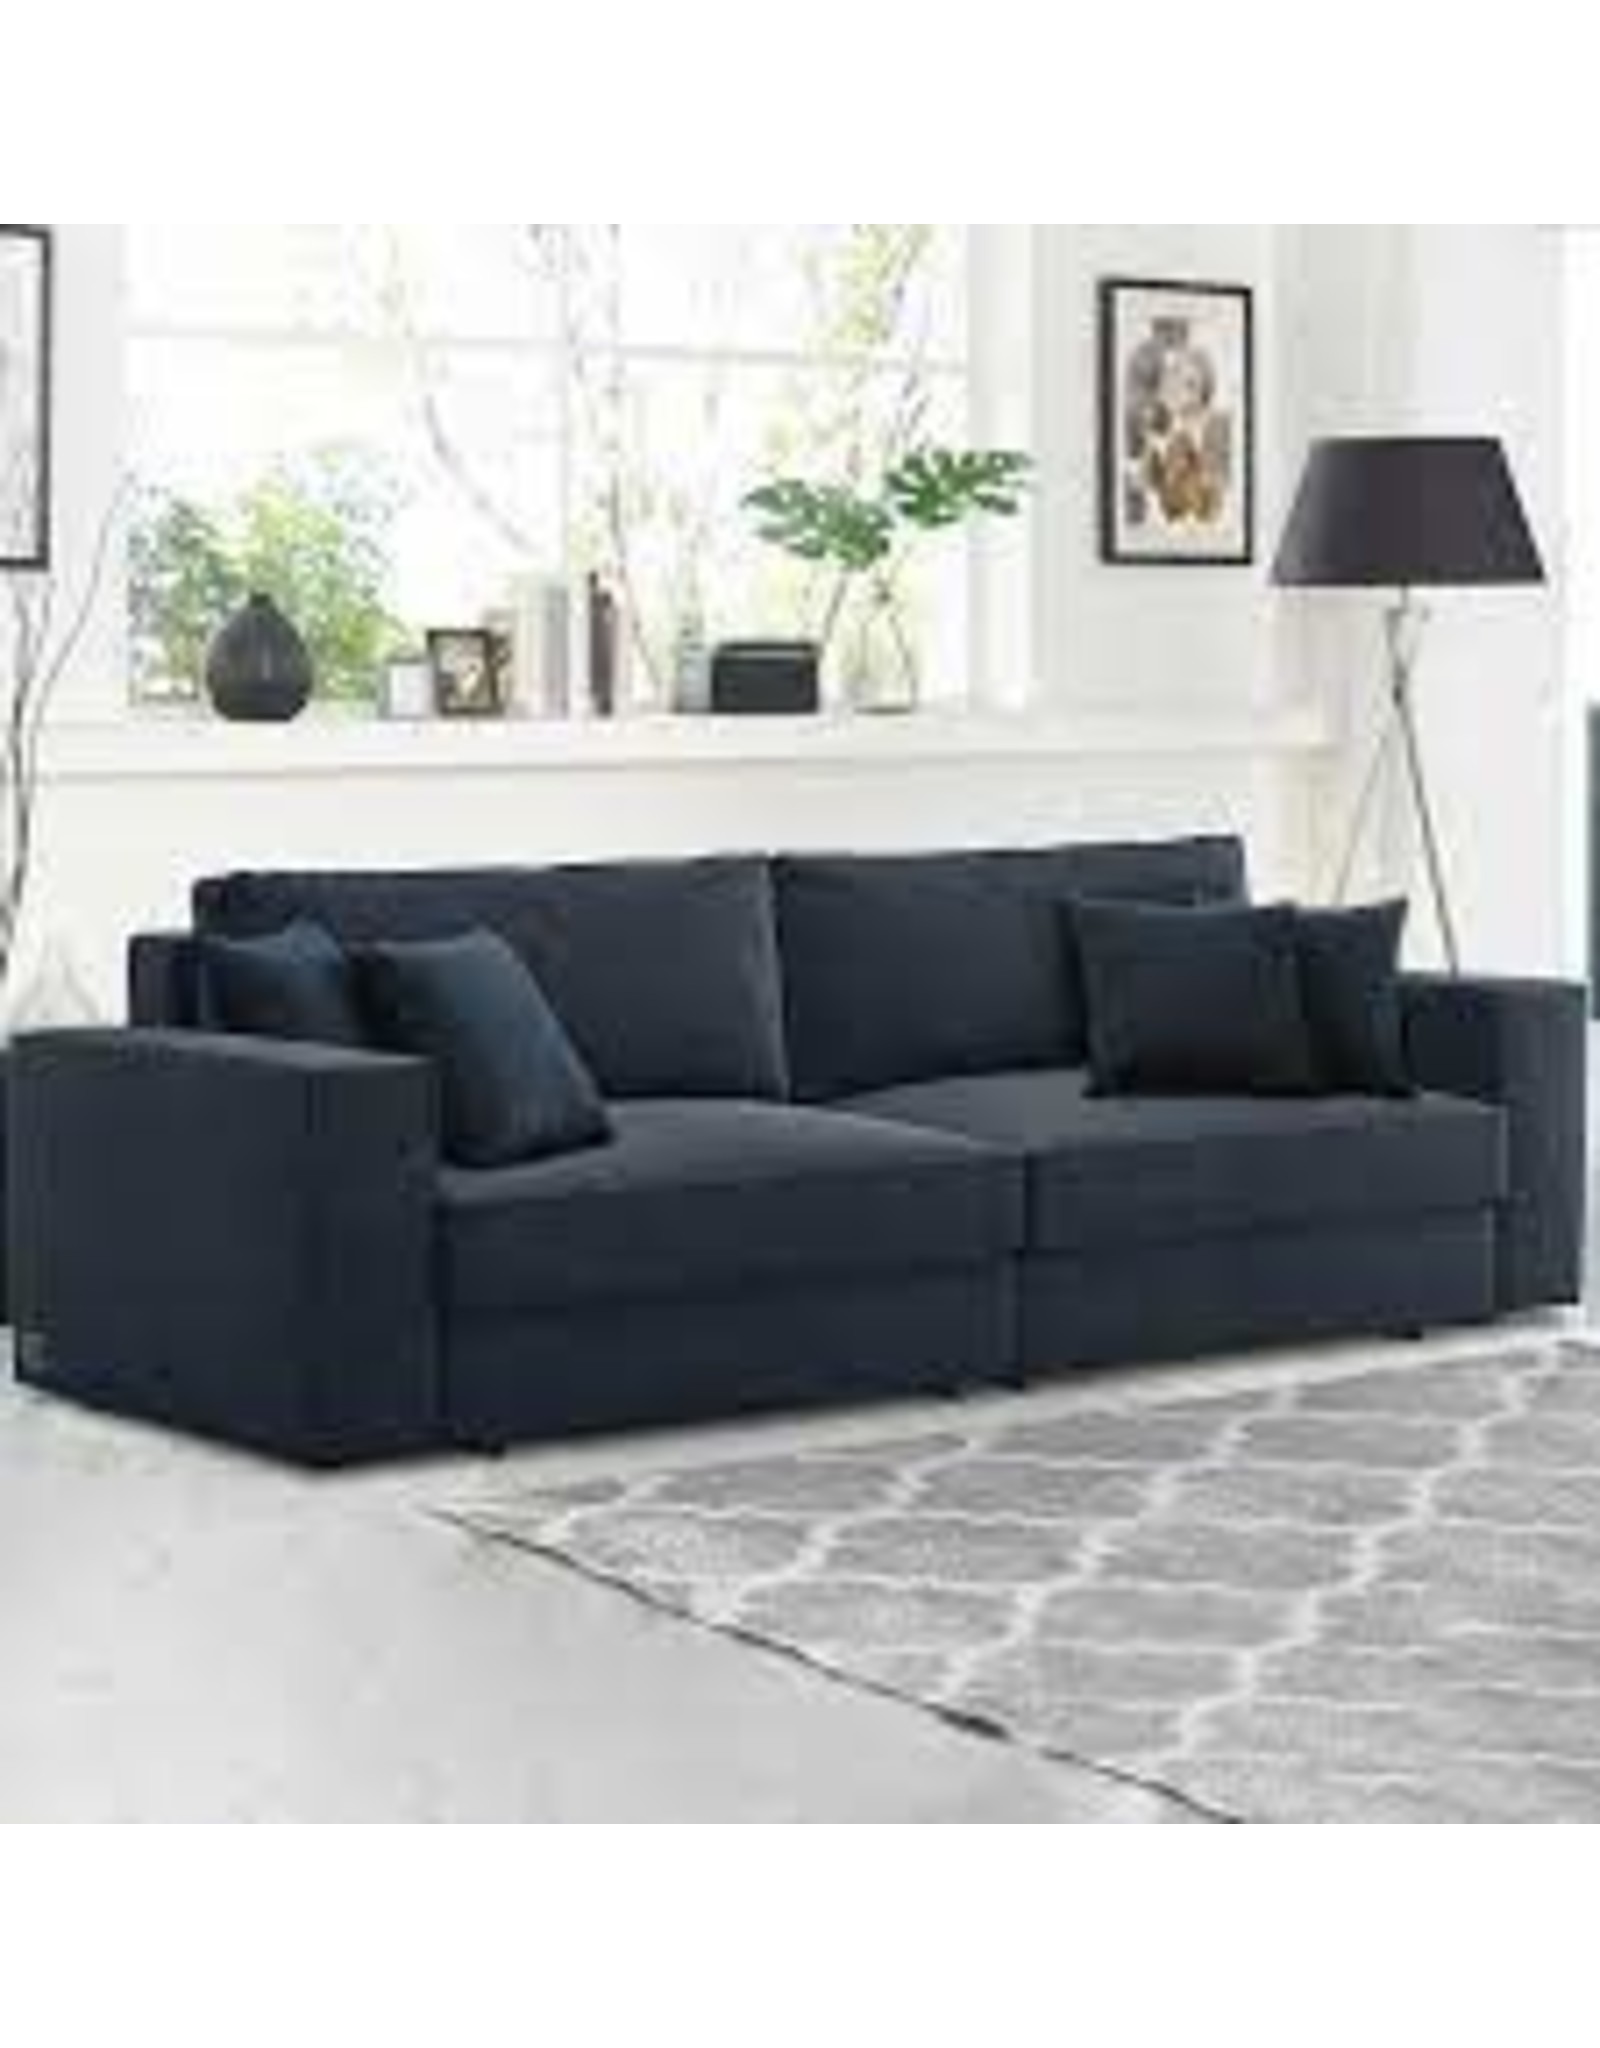 Coddle Switch Queen Convertible Sofa with Accent Pillows